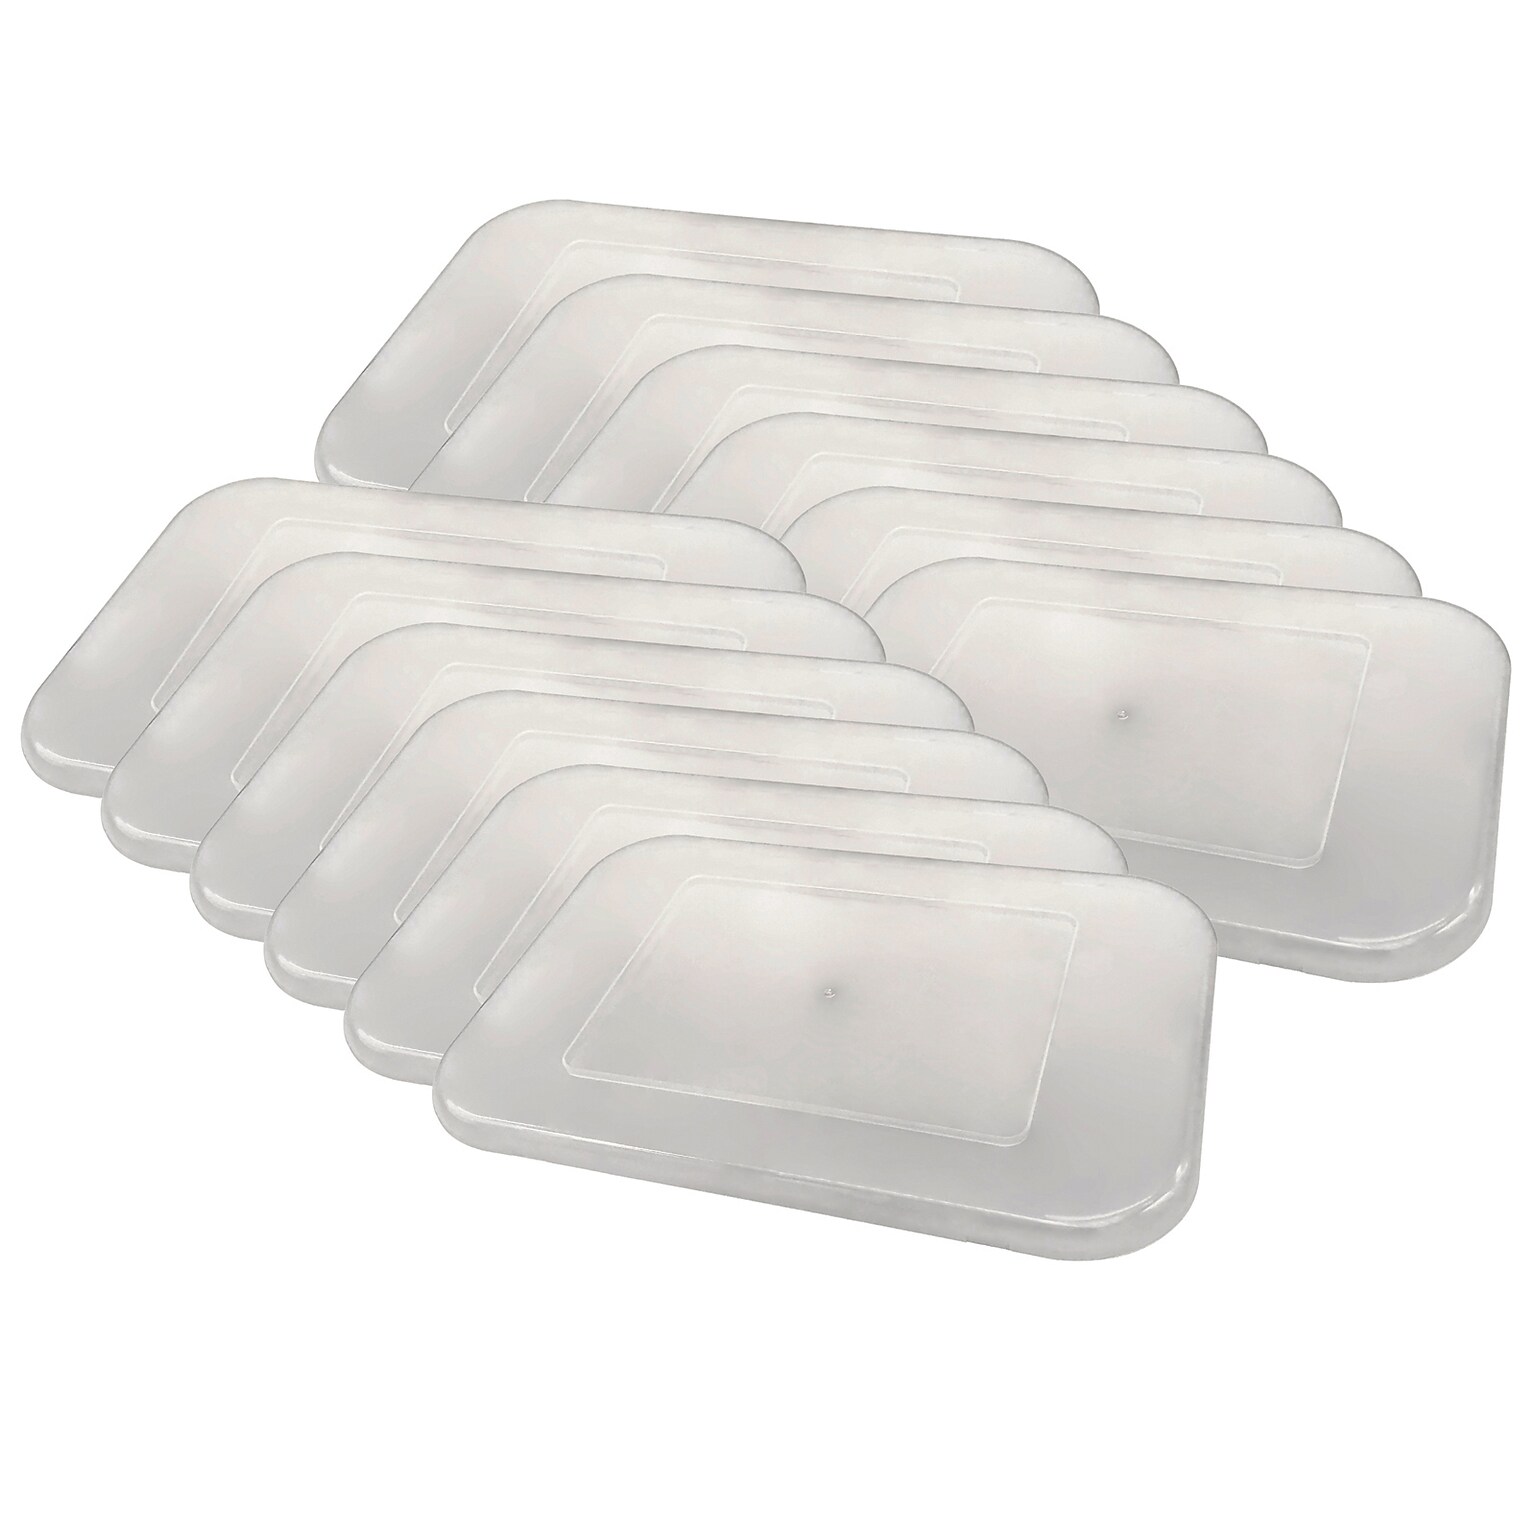 Teacher Created Resources Plastic Storage Bin Lid, Small, Clear, Pack of 12 (TCR20342-12)